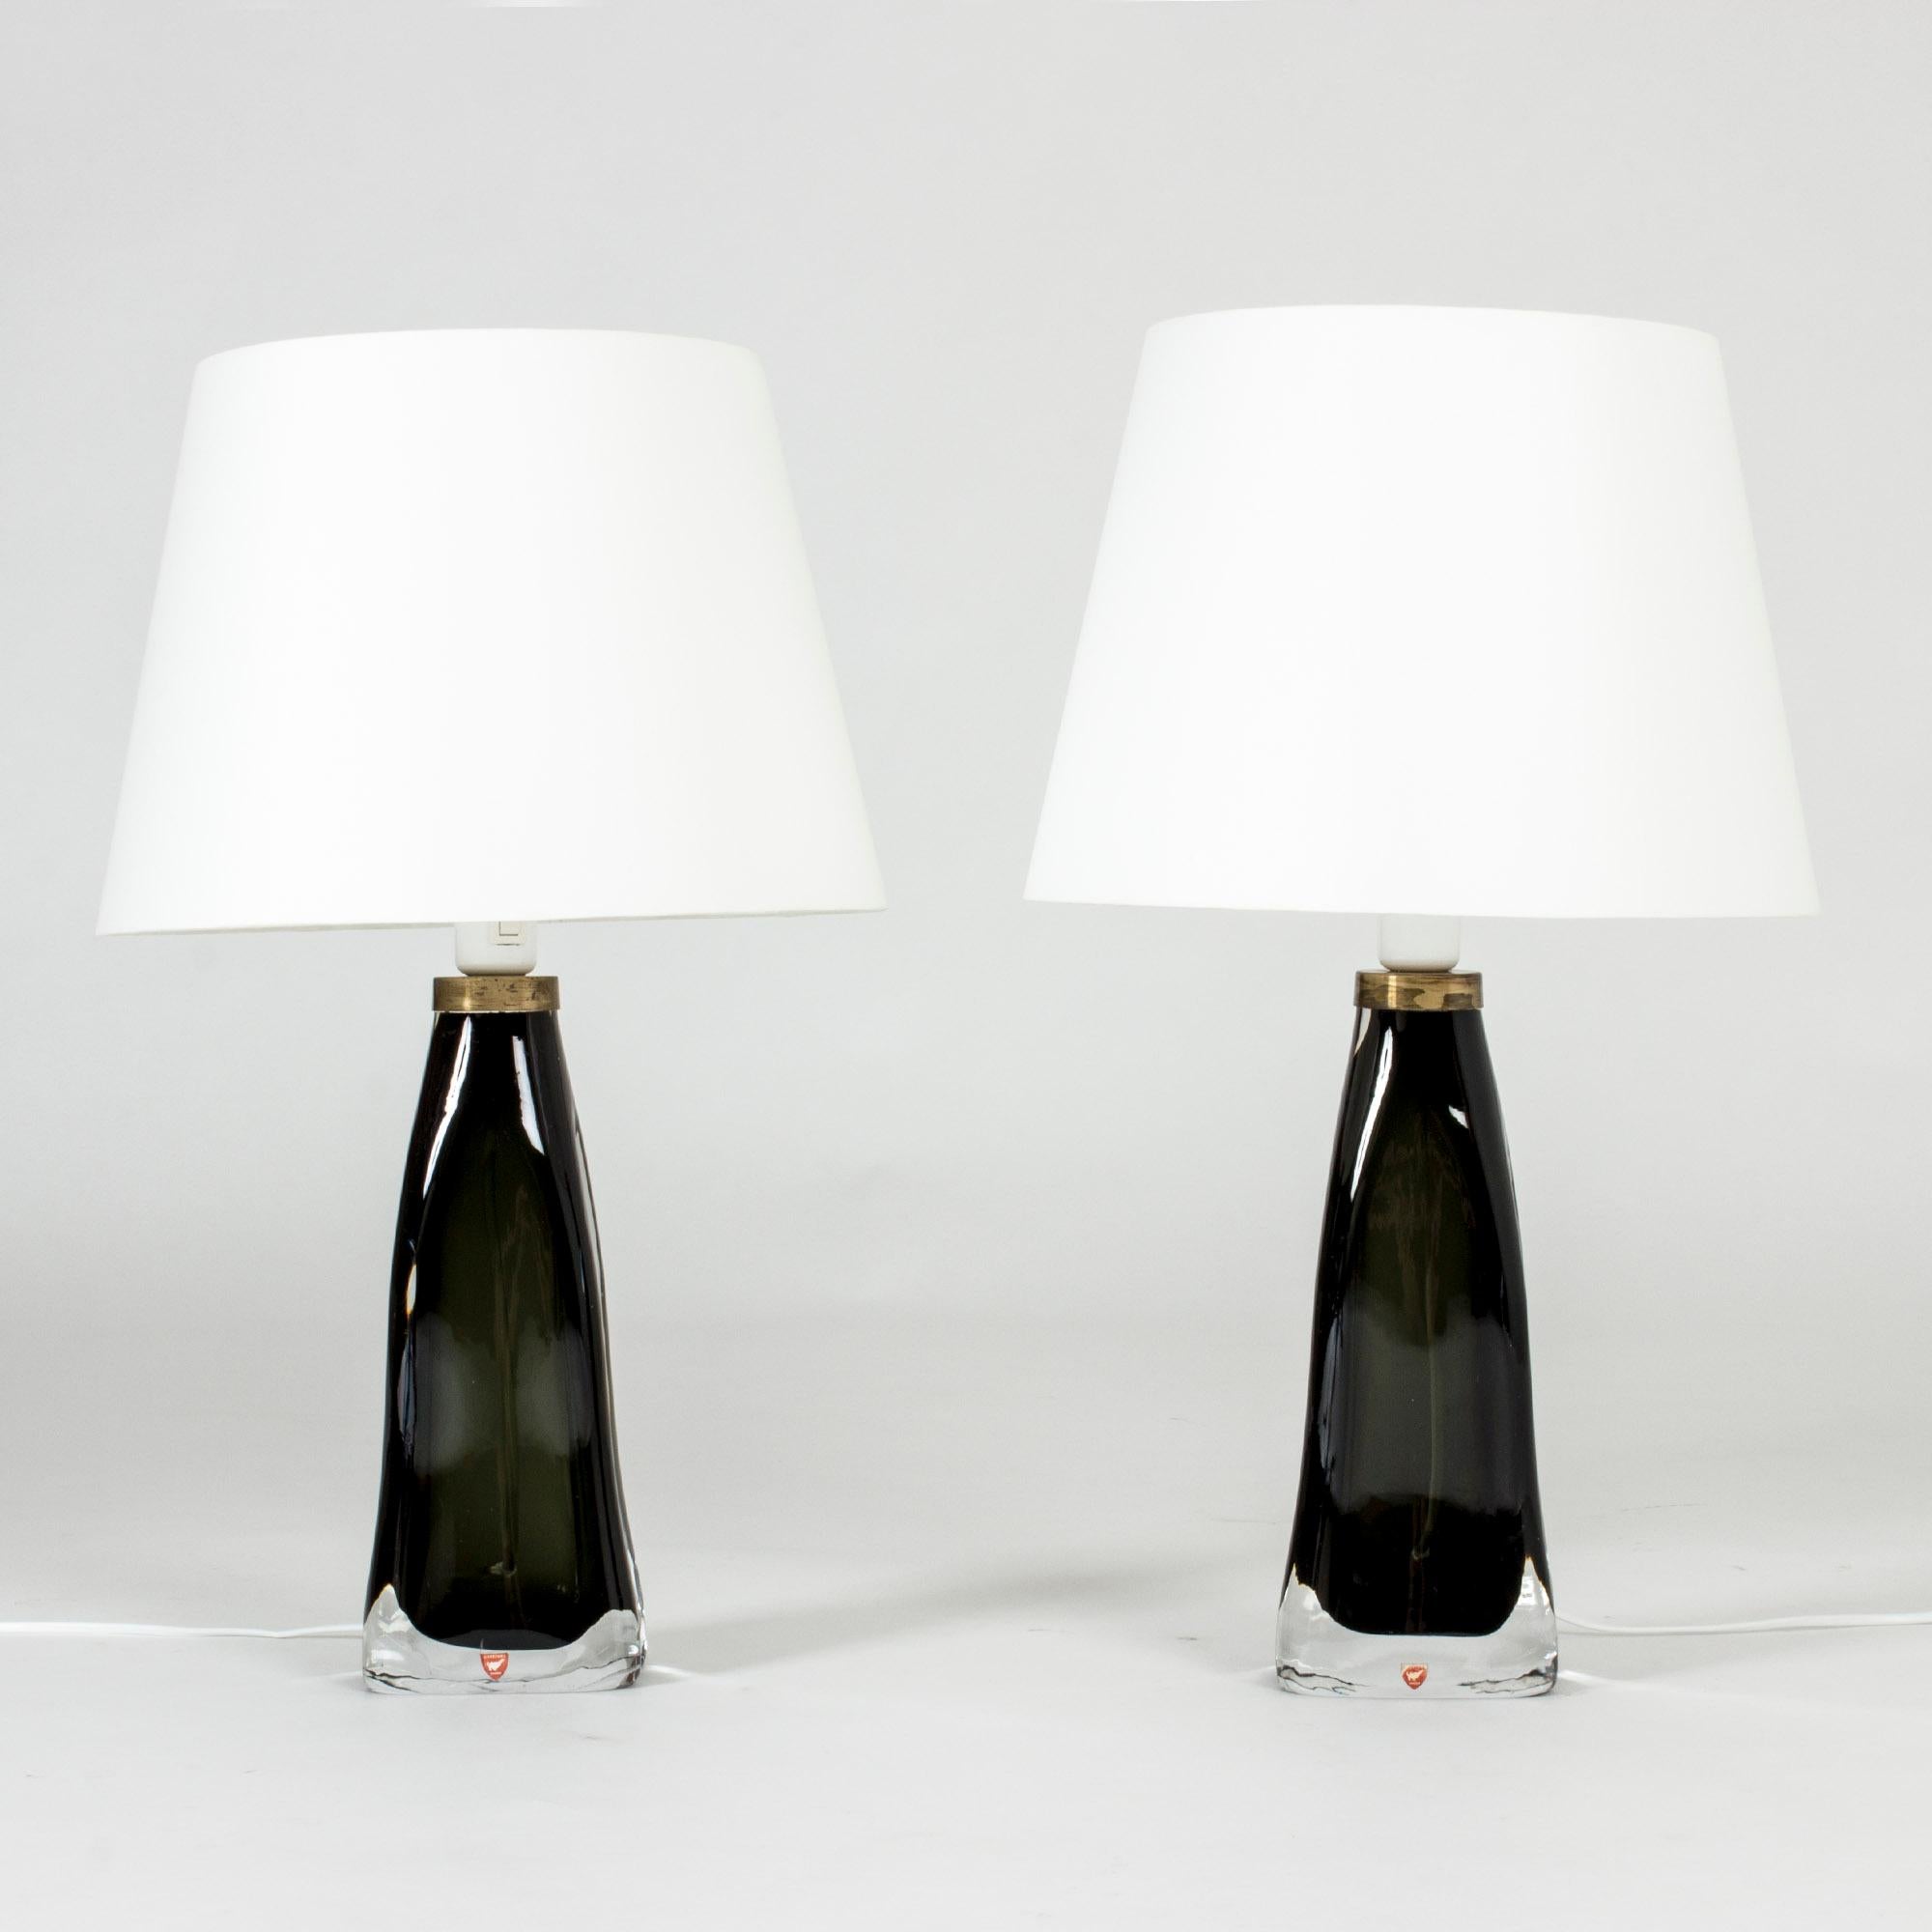 Pair of inky dark green, semi-translucent glass table lamps by Carl Fagerlund for Orrefors. Heavy glass bases with a somewhat undulating shape and brass detail at the top. Very elegant and beautiful in a window.